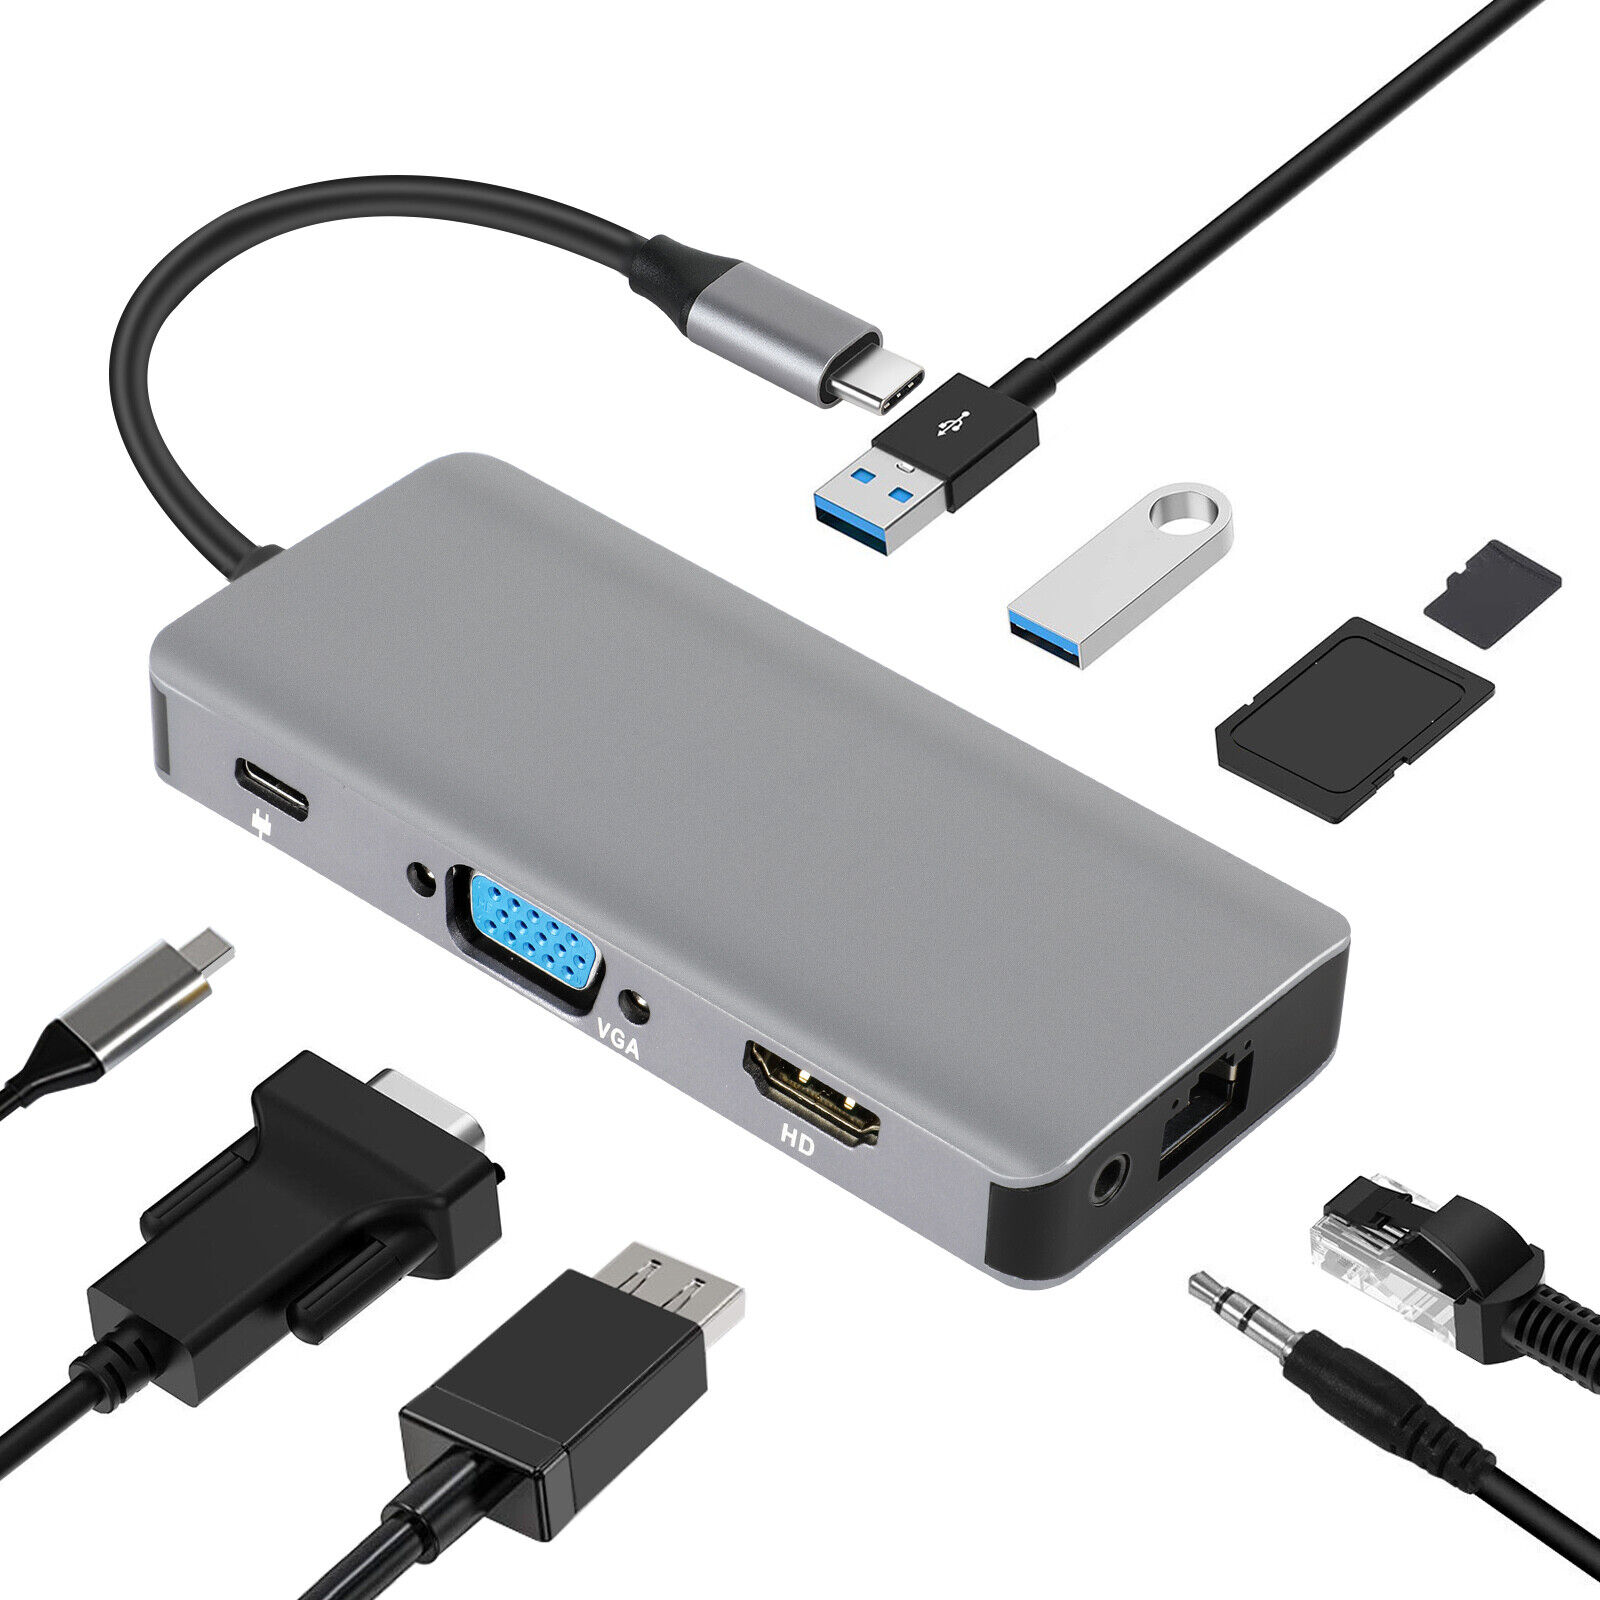 9 in 1 Multiport USB-C Hub To HDMI VGA USB 3.0 4K Adapter For Macbook Pro/Air